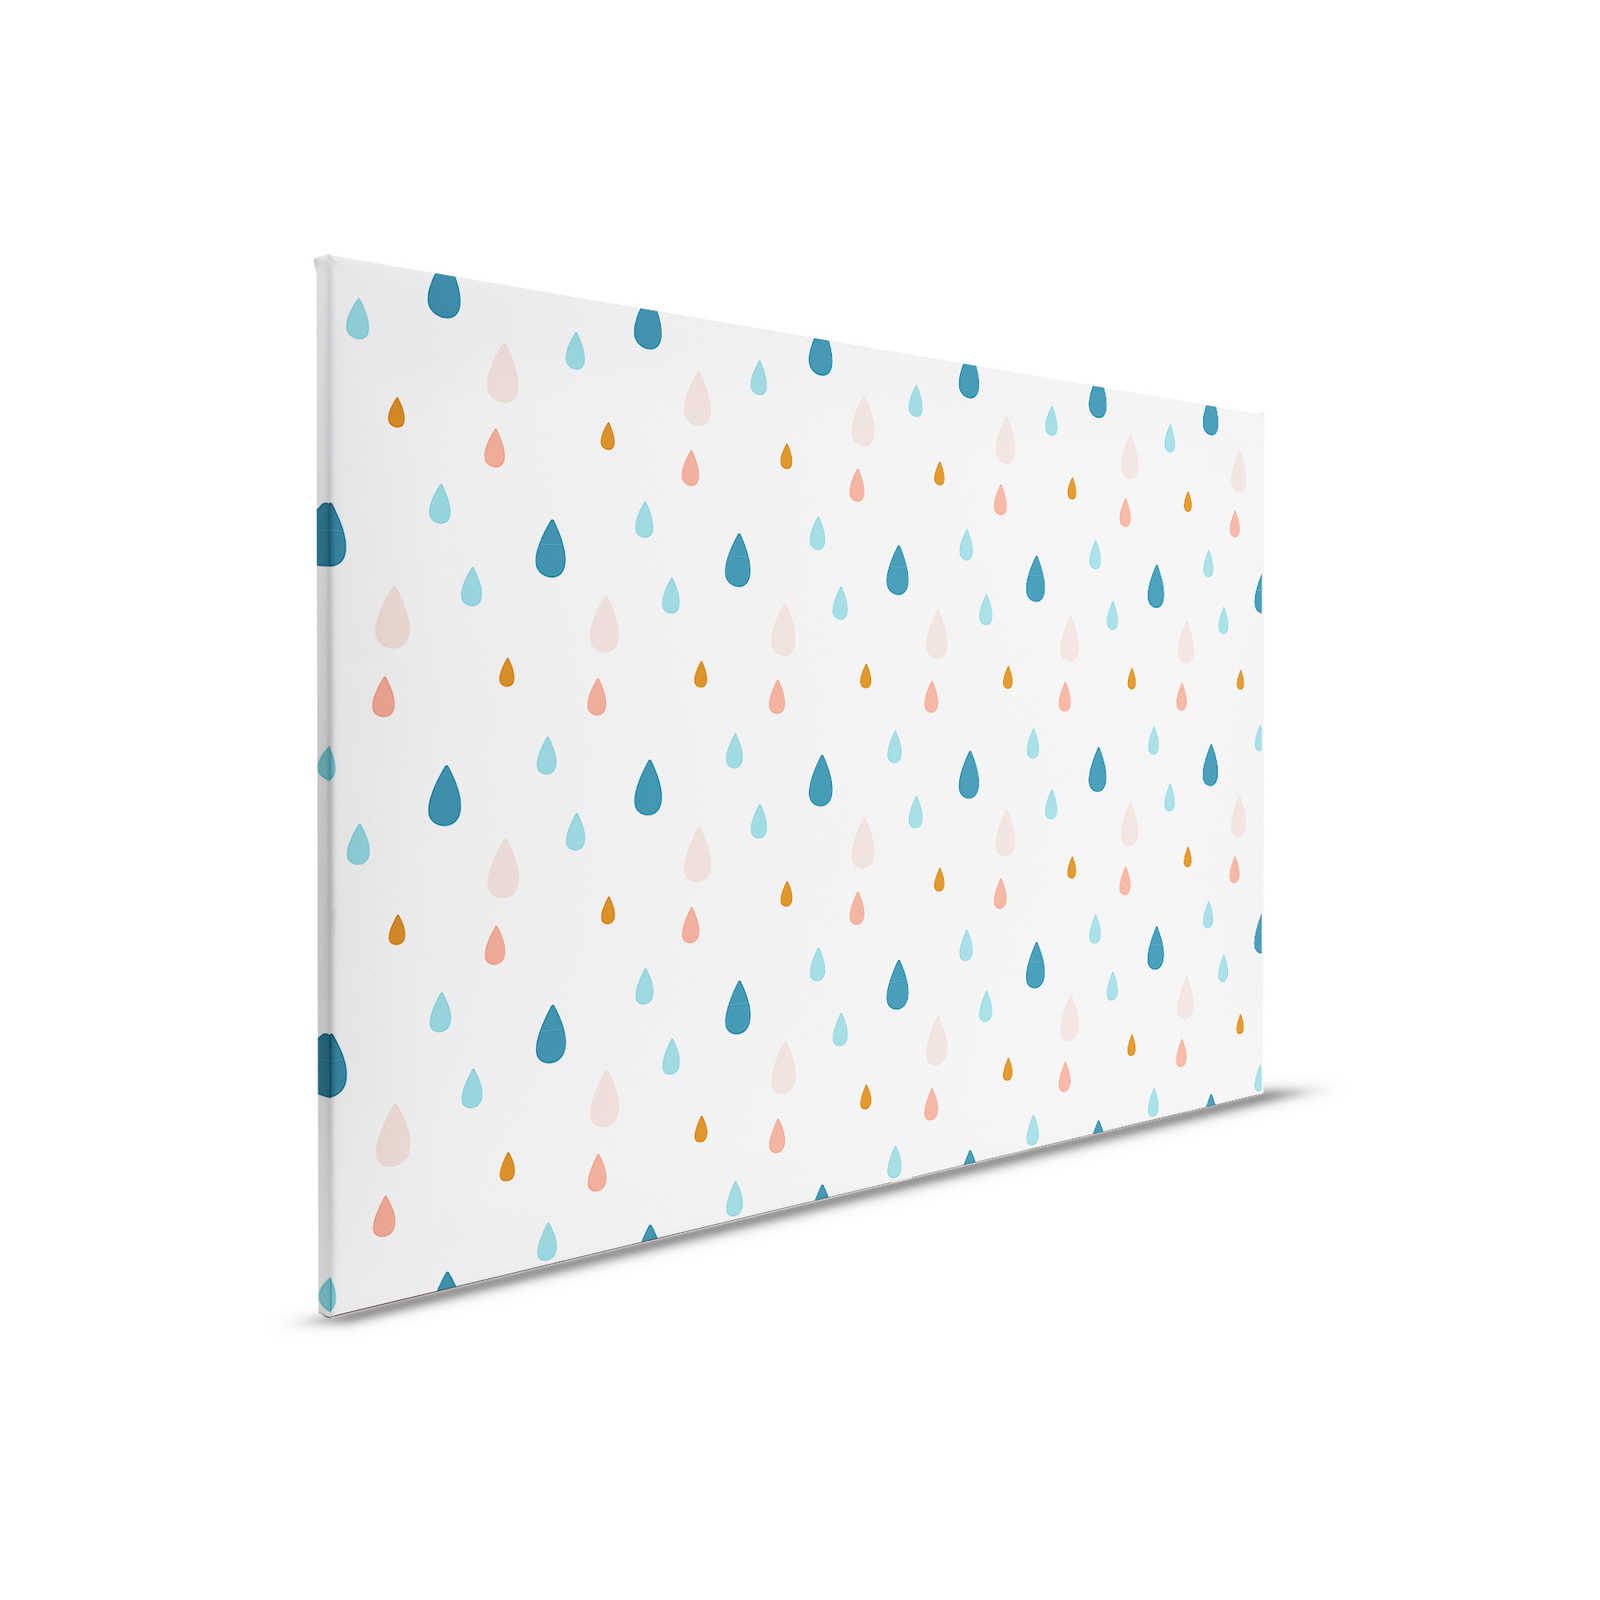         Canvas for children's room with colourful water drops - 90 cm x 60 cm
    